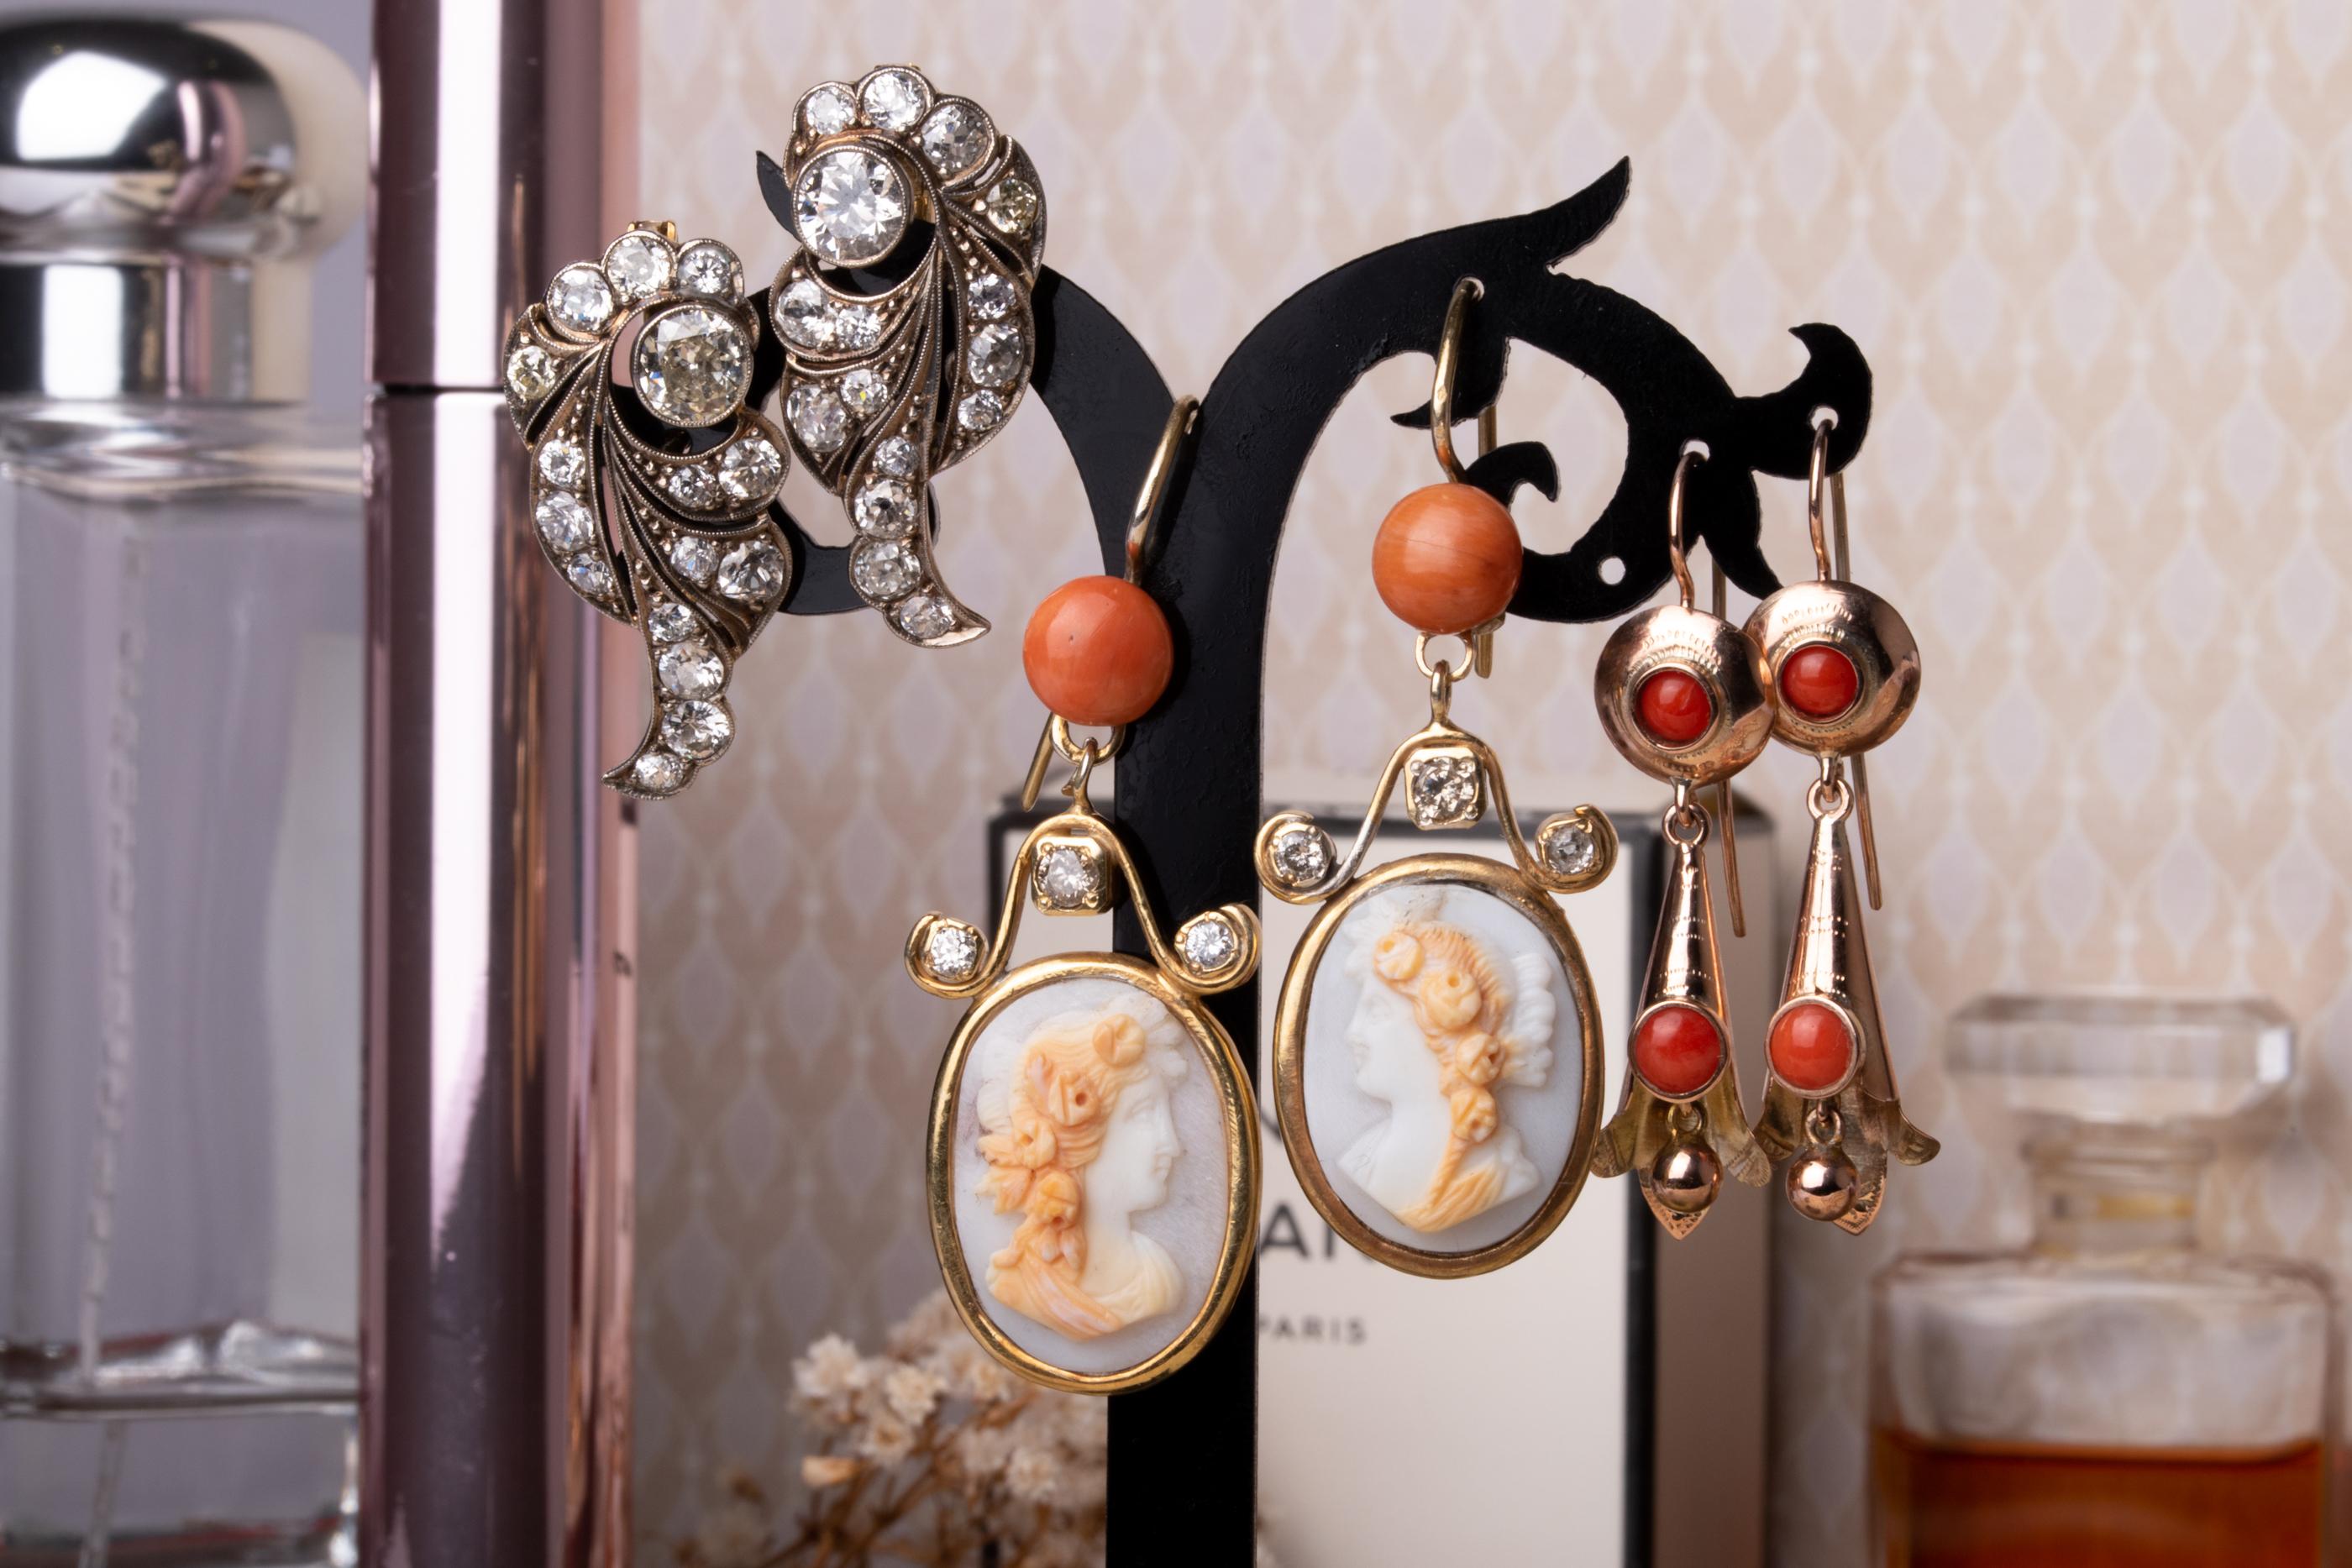 Women's Antique Edwardian Hard Stone Cameo Earrings, Antique Coral and Diamond Earrings